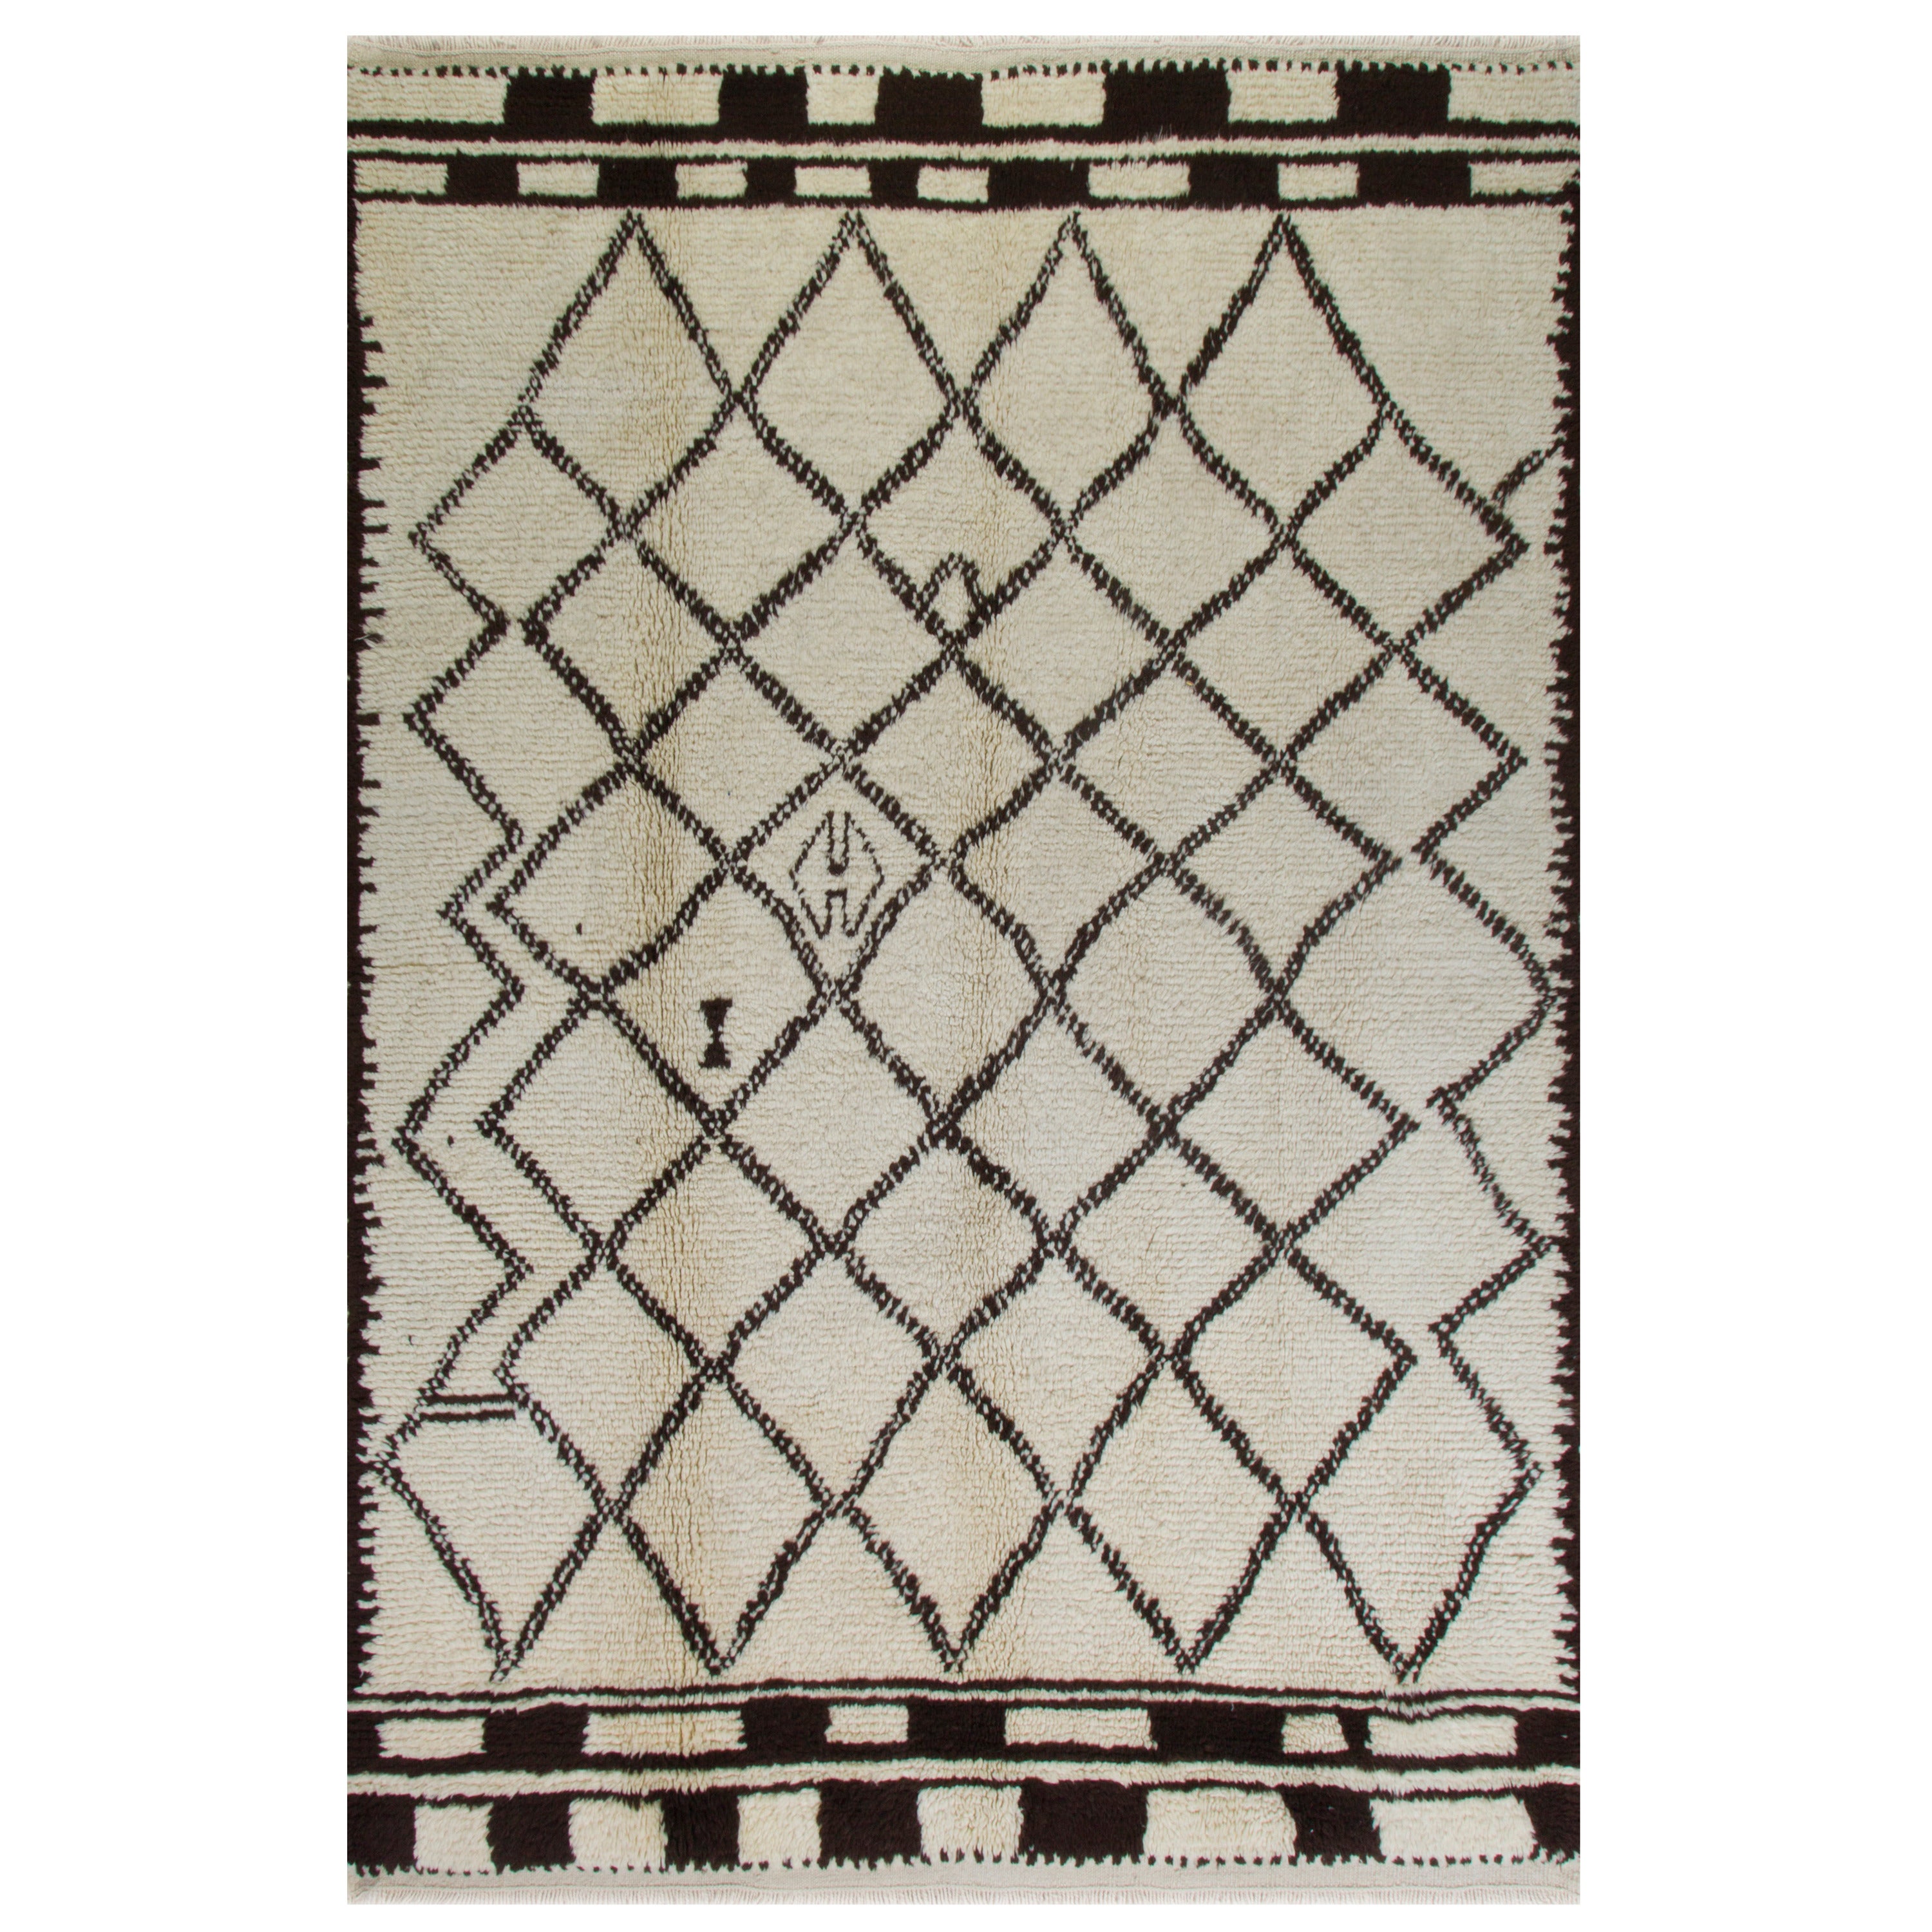 Moroccan Rug Made of Natural Ivory and Dark Brown Wool